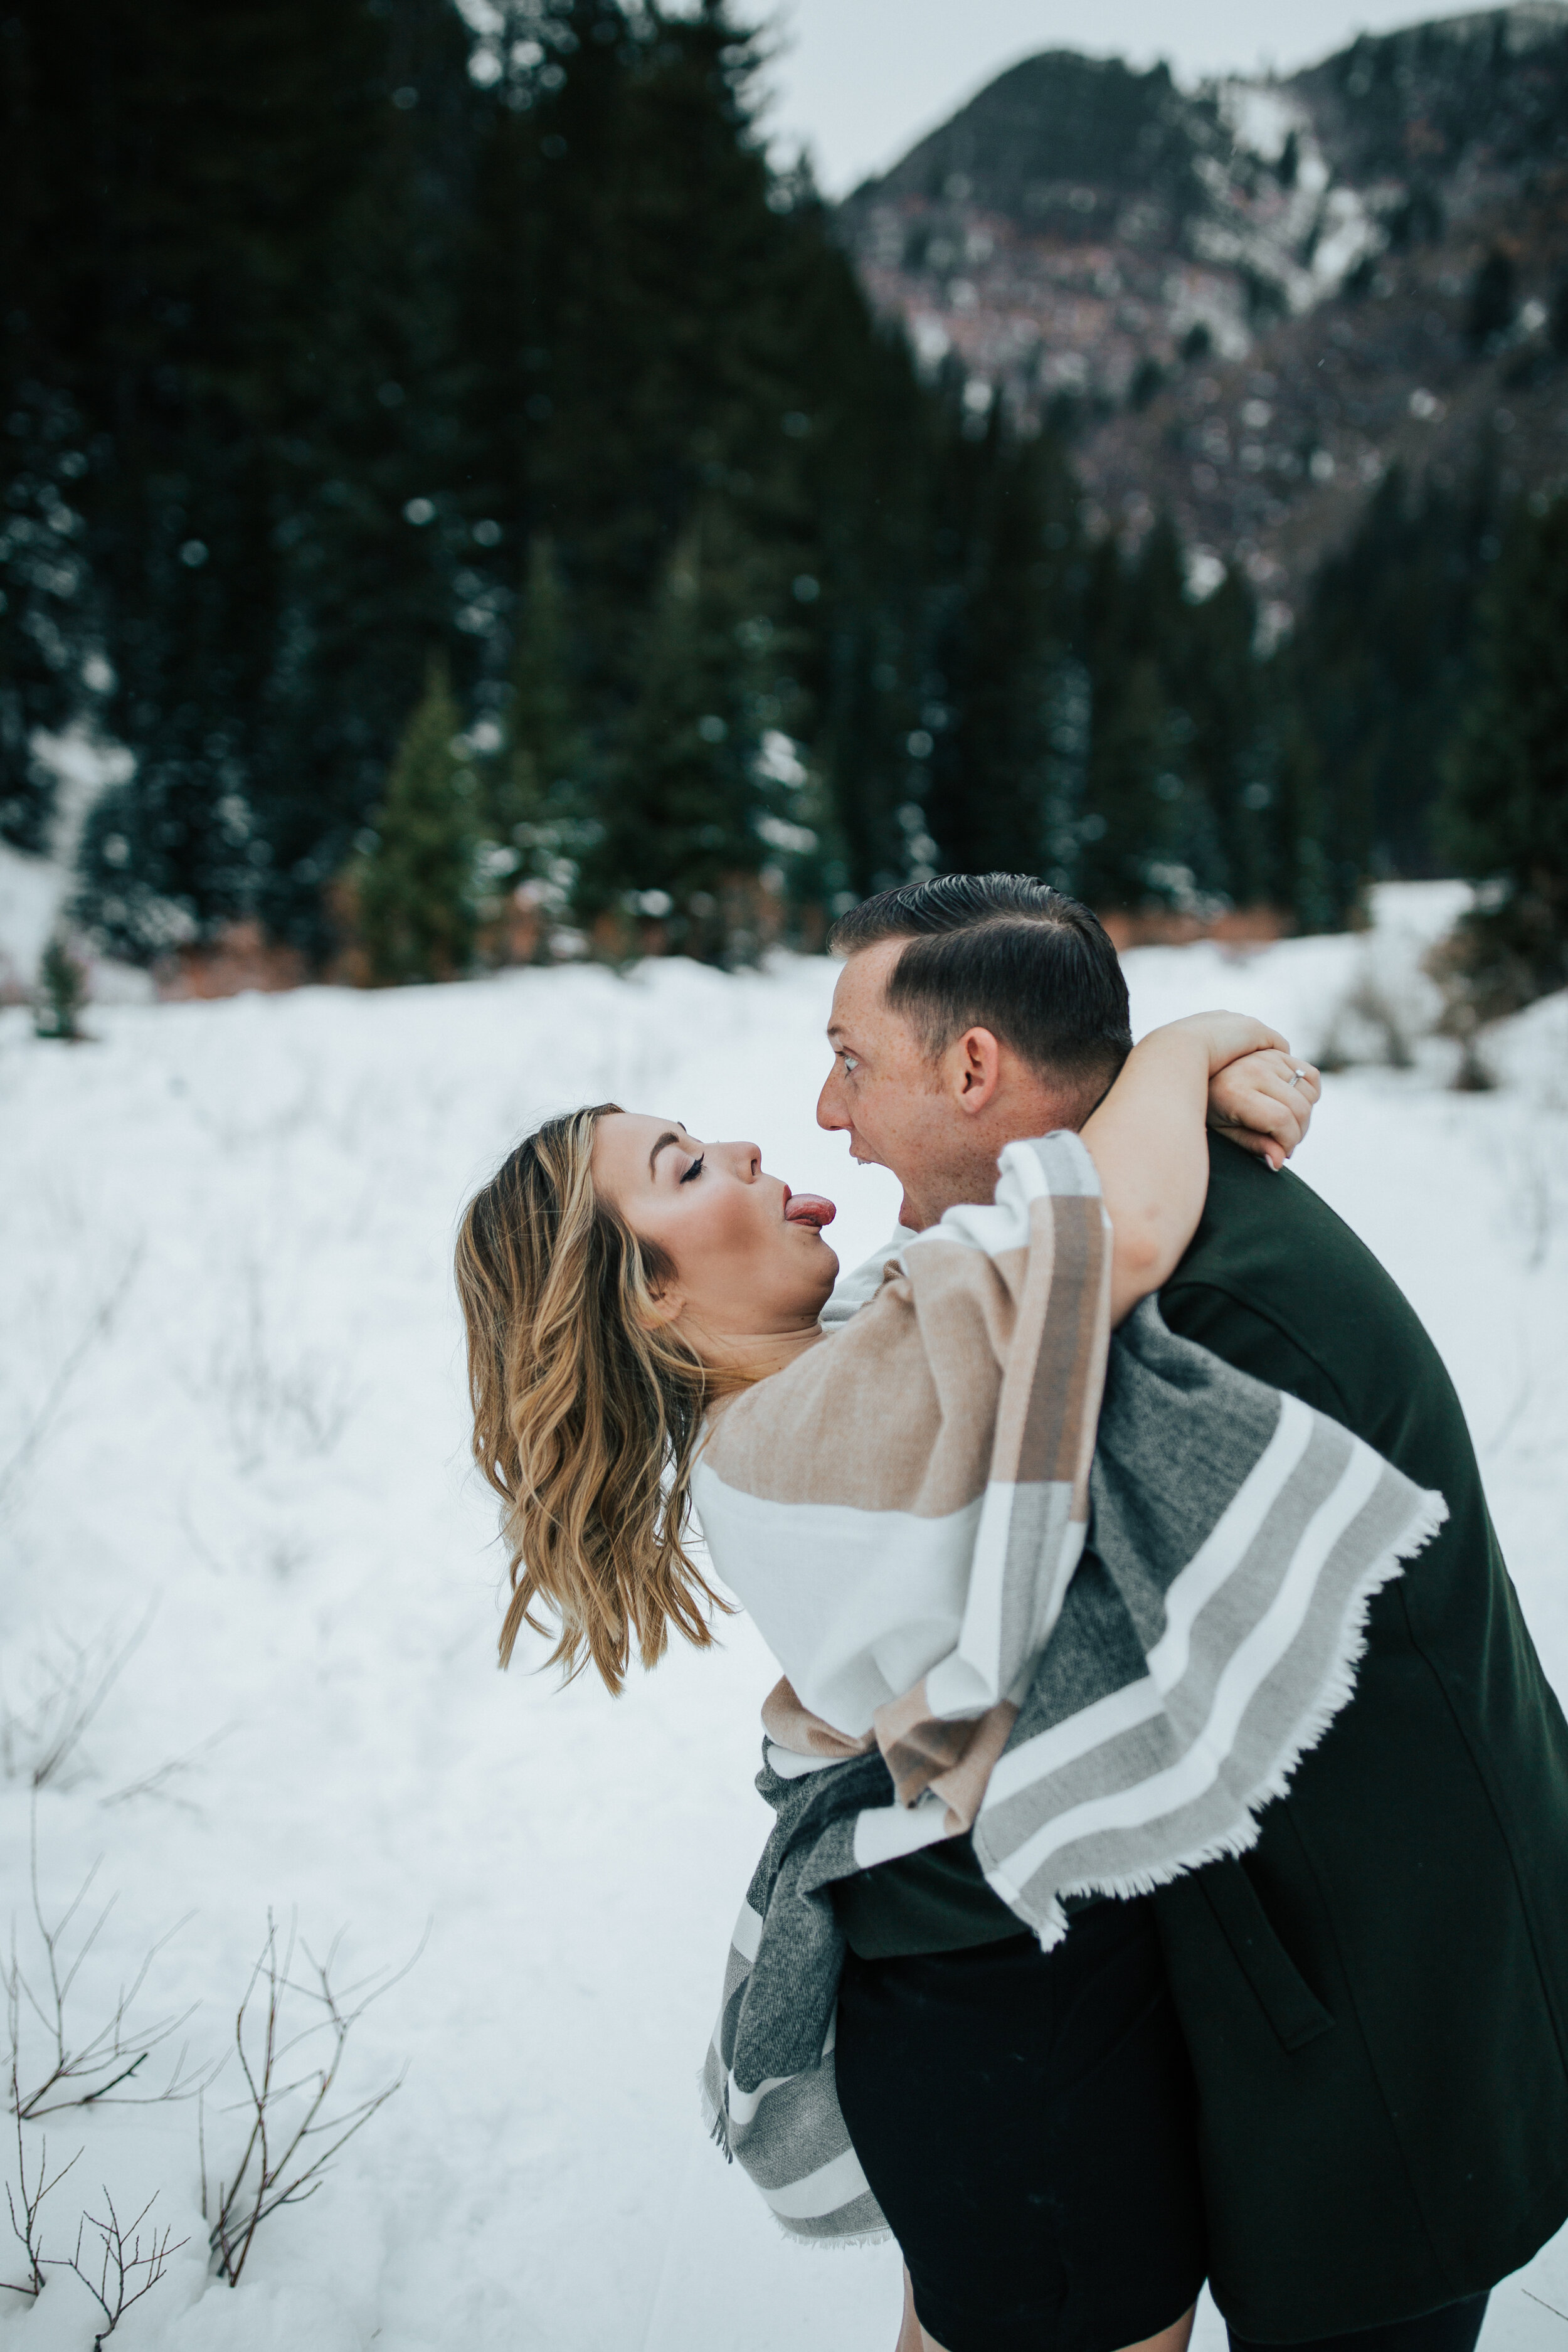 Winter engagement session in Park City, Utah engagements in the mountains snowy couples shoot #engagementshoot #winterengagements #couplesession #coupleshoot